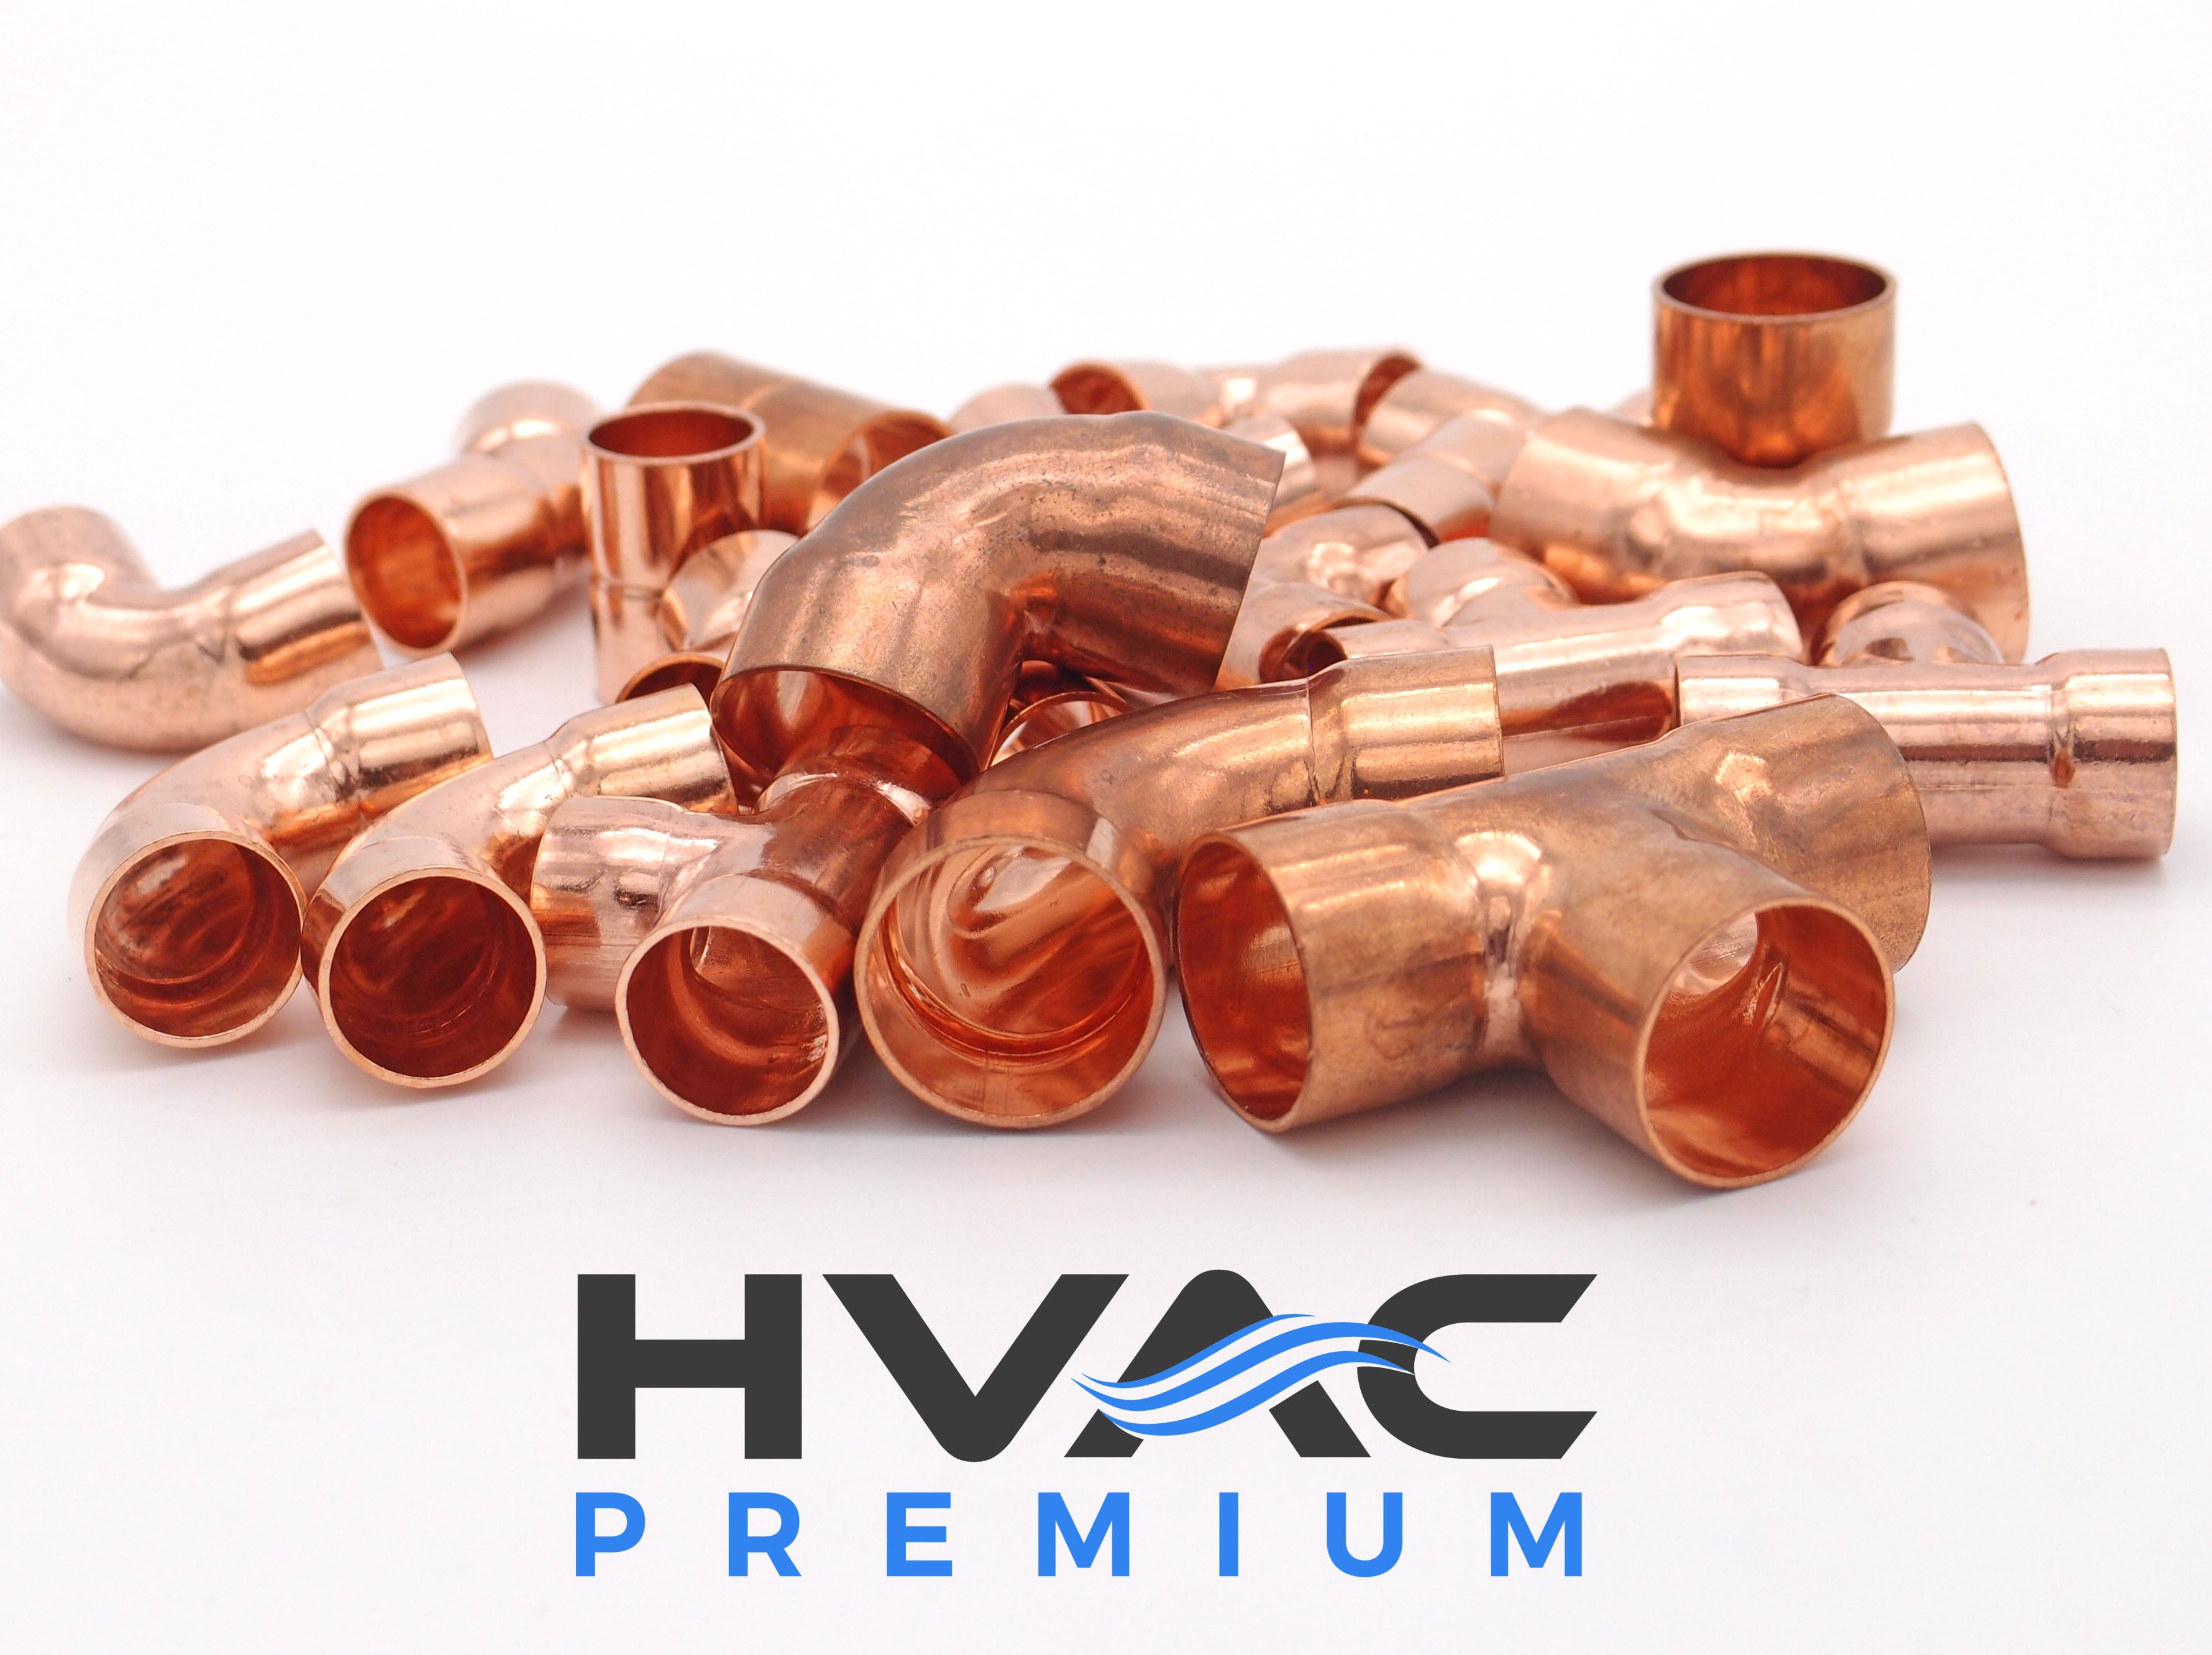 Copper Fitting 7/8 Inch (HVAC Outer Dimension) 3/4 Inch (Plumbing Inner Dimension) - Copper Tee & HVAC – 99.9% Pure Copper - 5 Pack